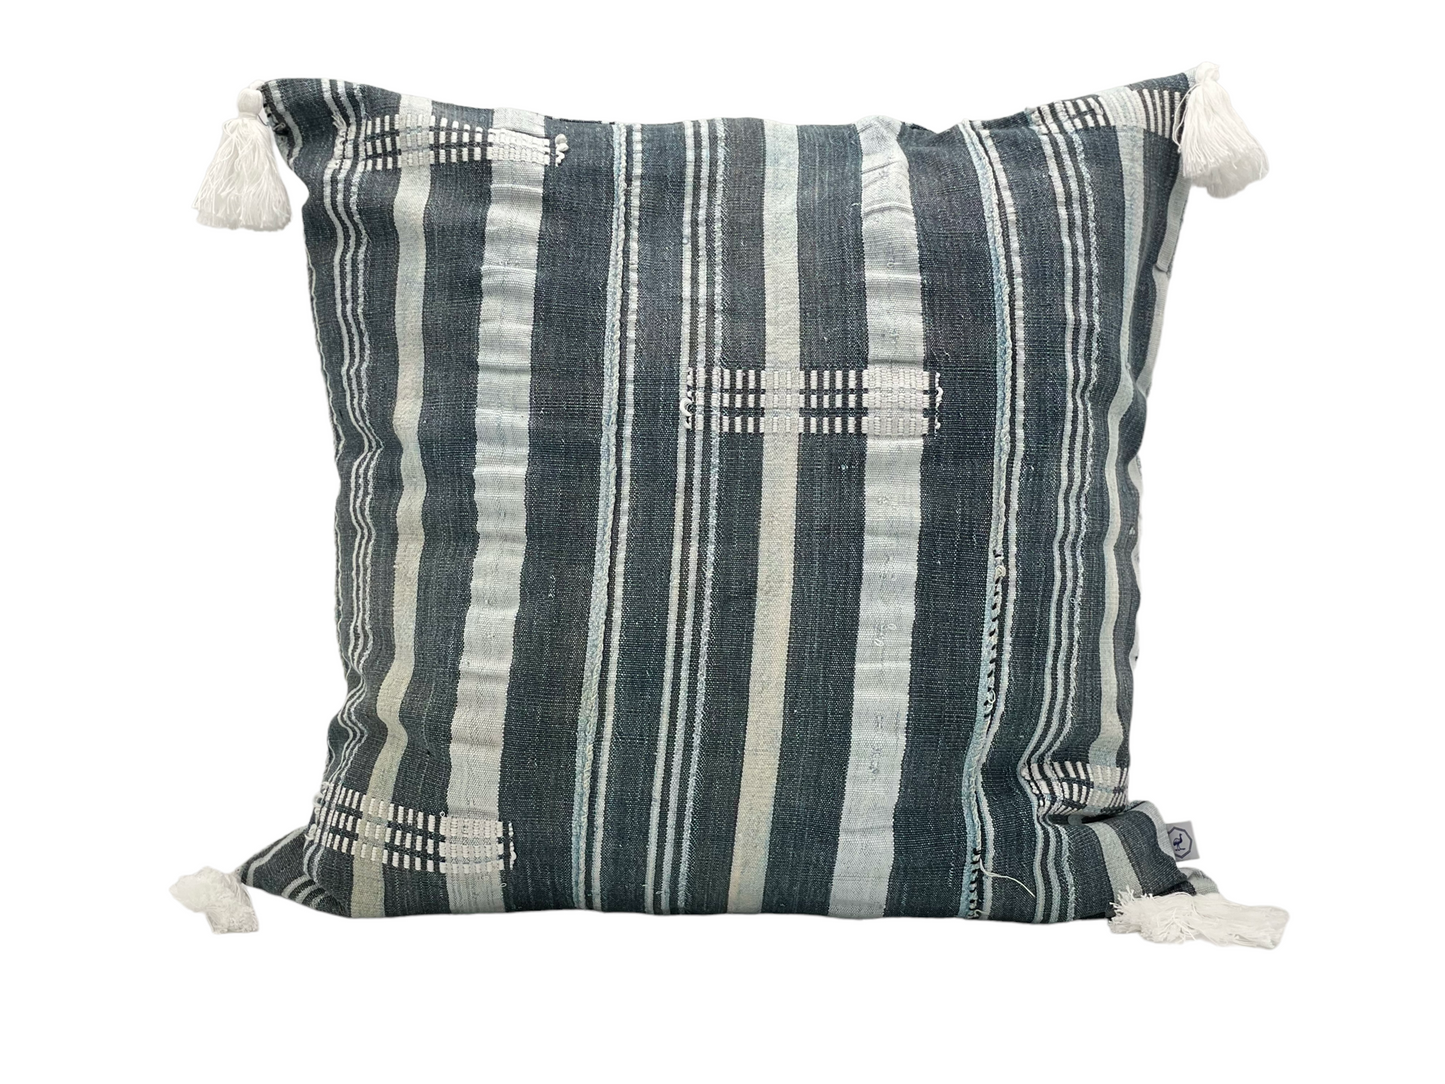 Ethnic cushion cover - Mossi vintage blue striped African fabric - TANGAZO